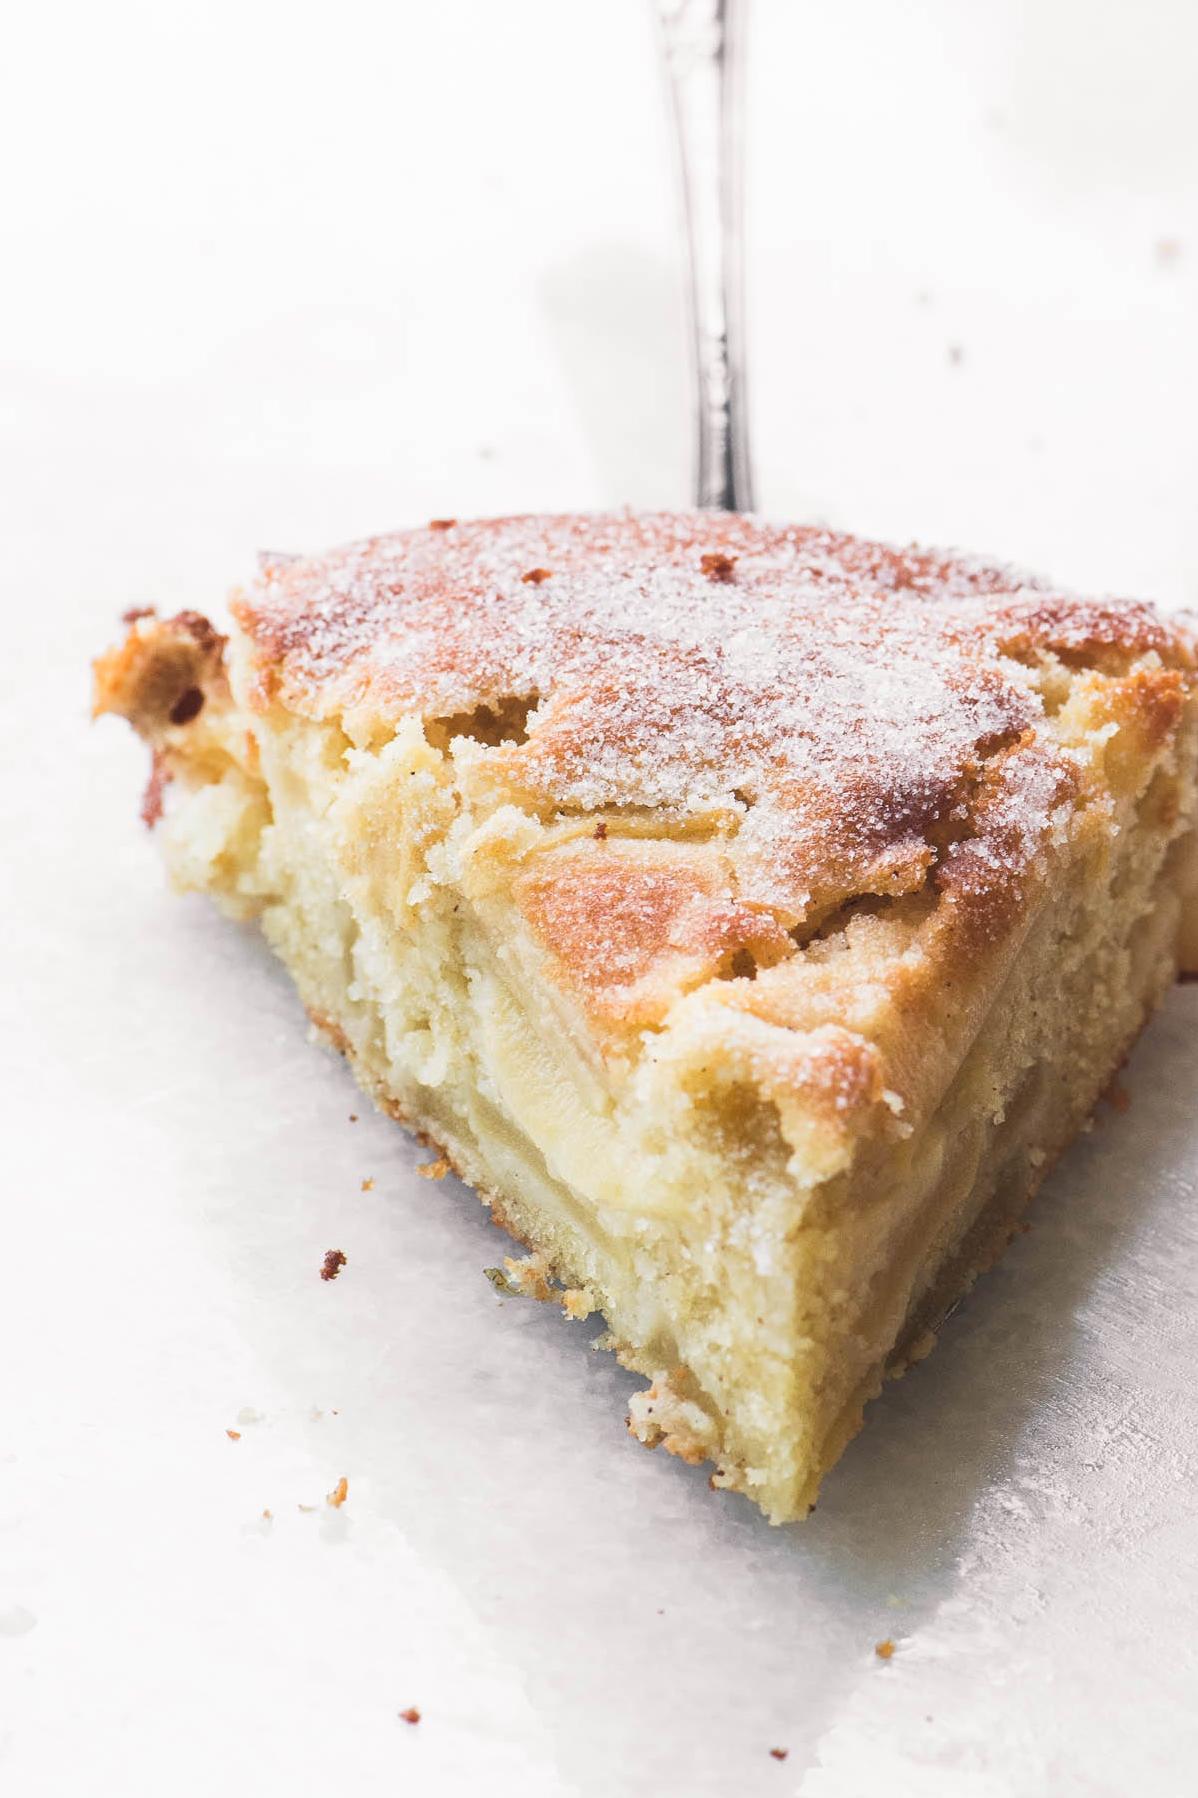  This Dutch apple cake is a gluten-free and dairy-free dream!